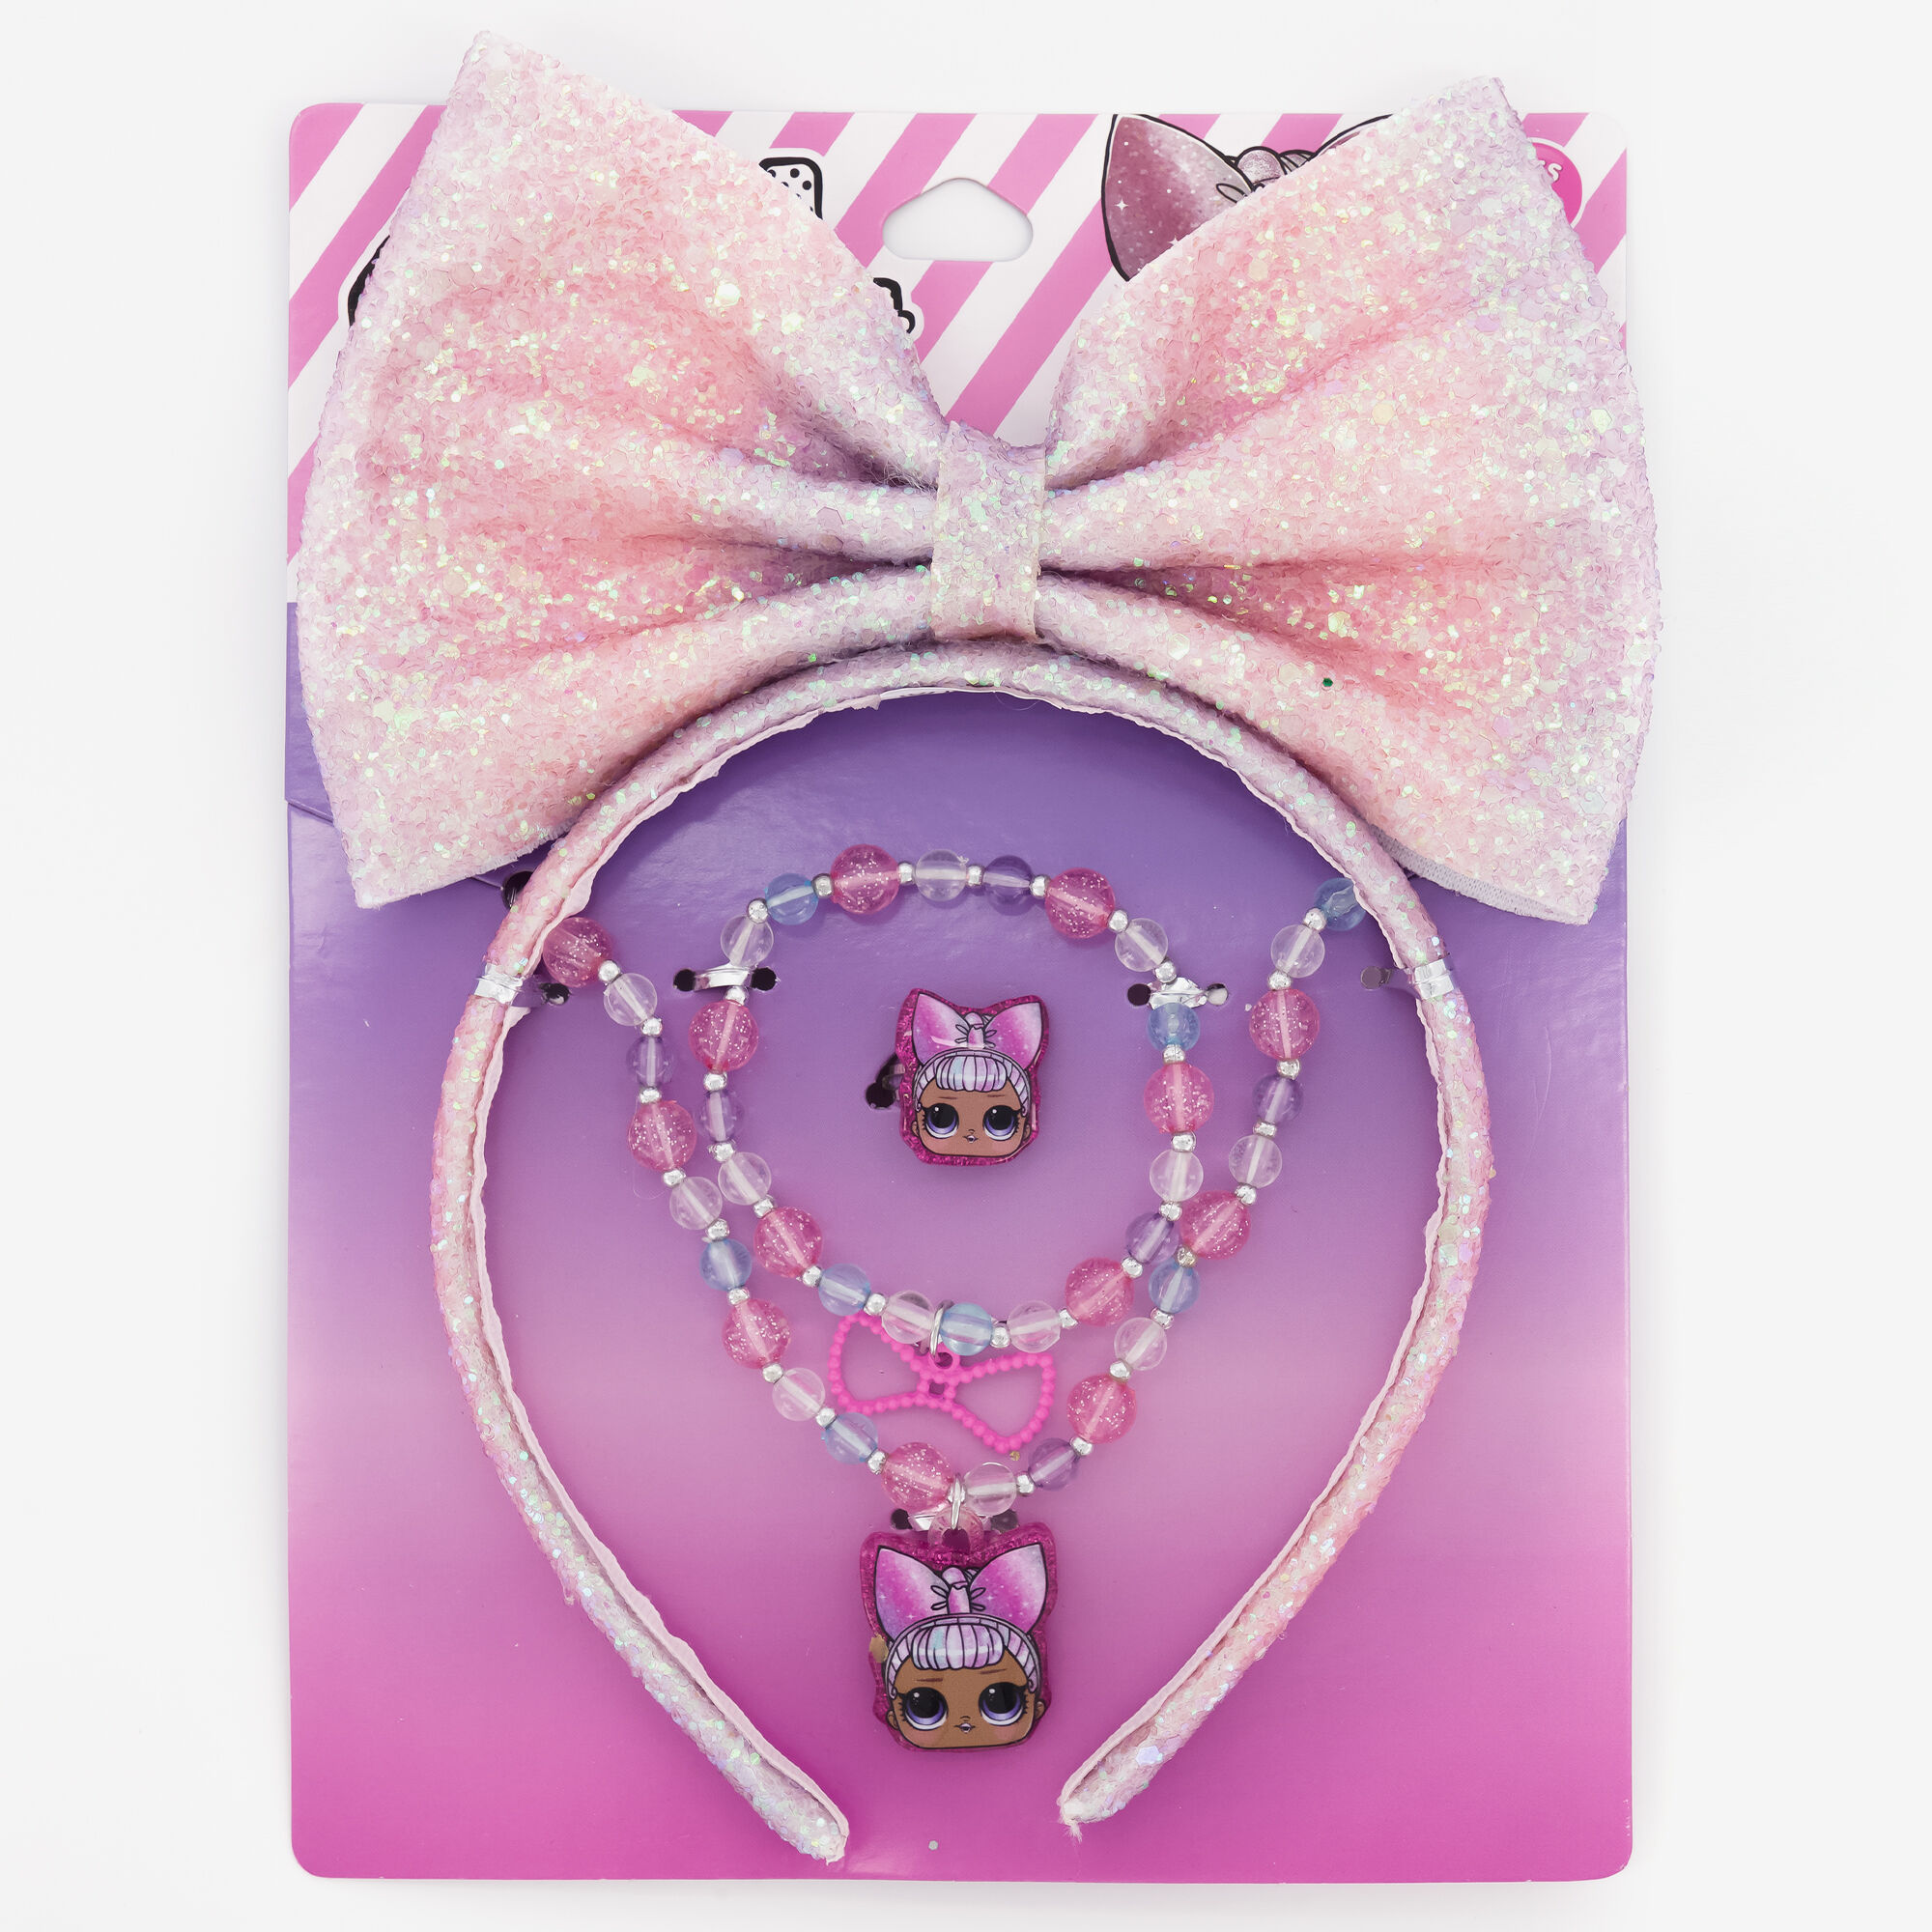 LOL Surprise doll accessories pink and blue bow headband 